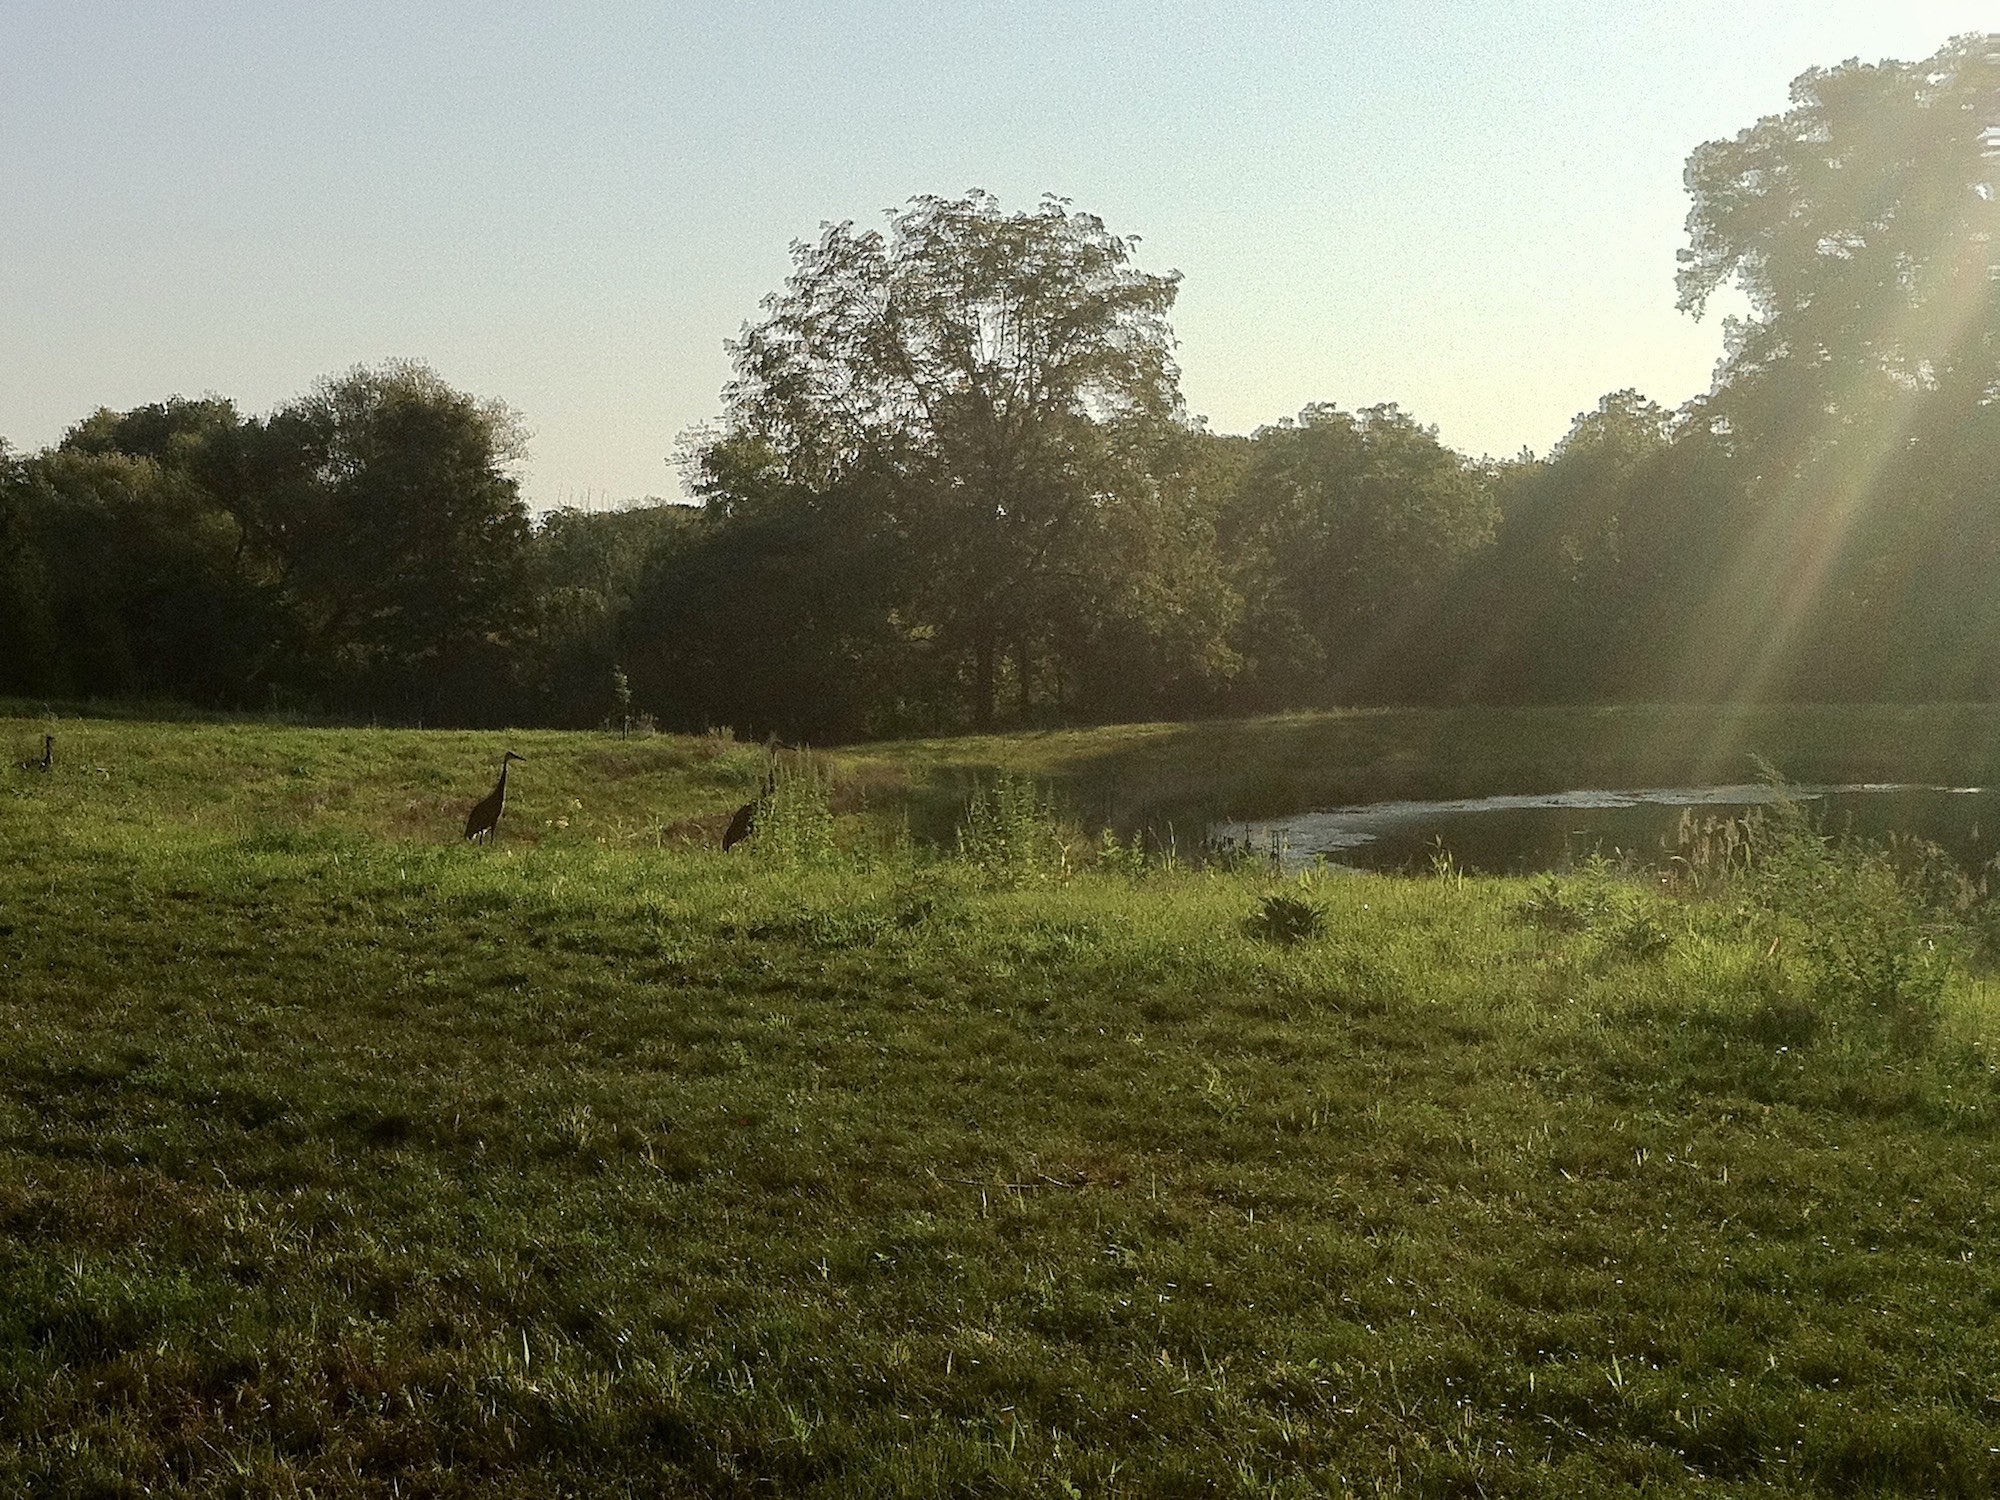 Sandhill Cranes in Stevens Pond area in Madison, Wisconsin on August 30, 2012.